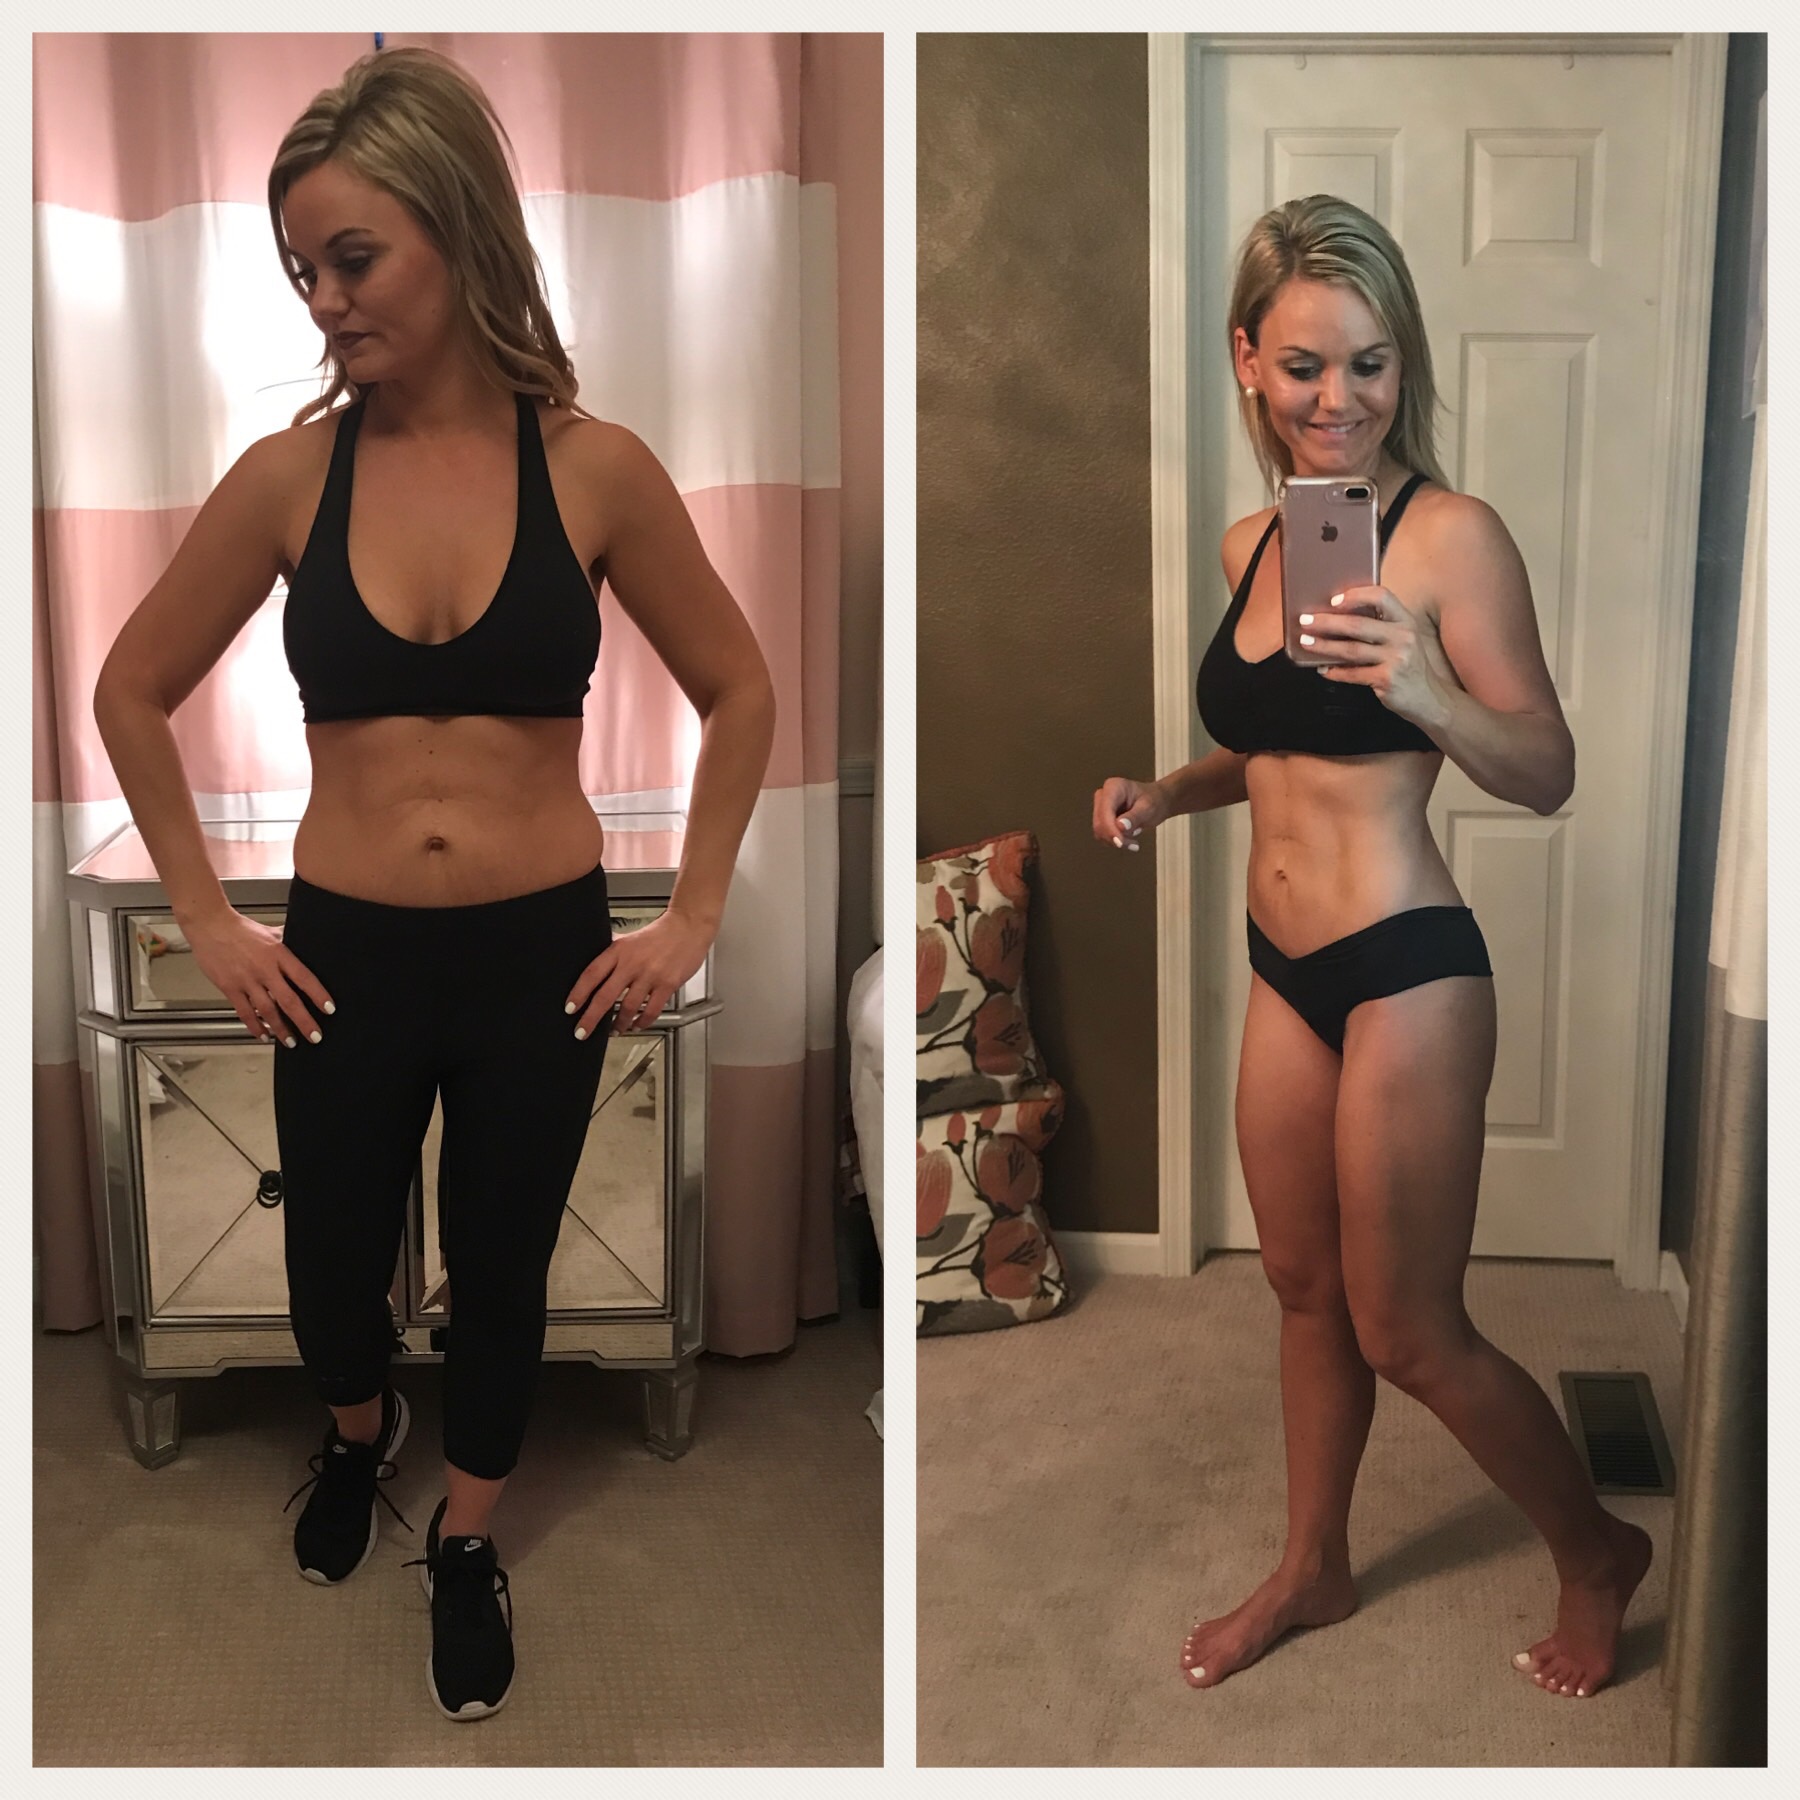 Faster Way to Fat Loss program results. My Before and After doing the FWTFL program and complete review on why this works. 